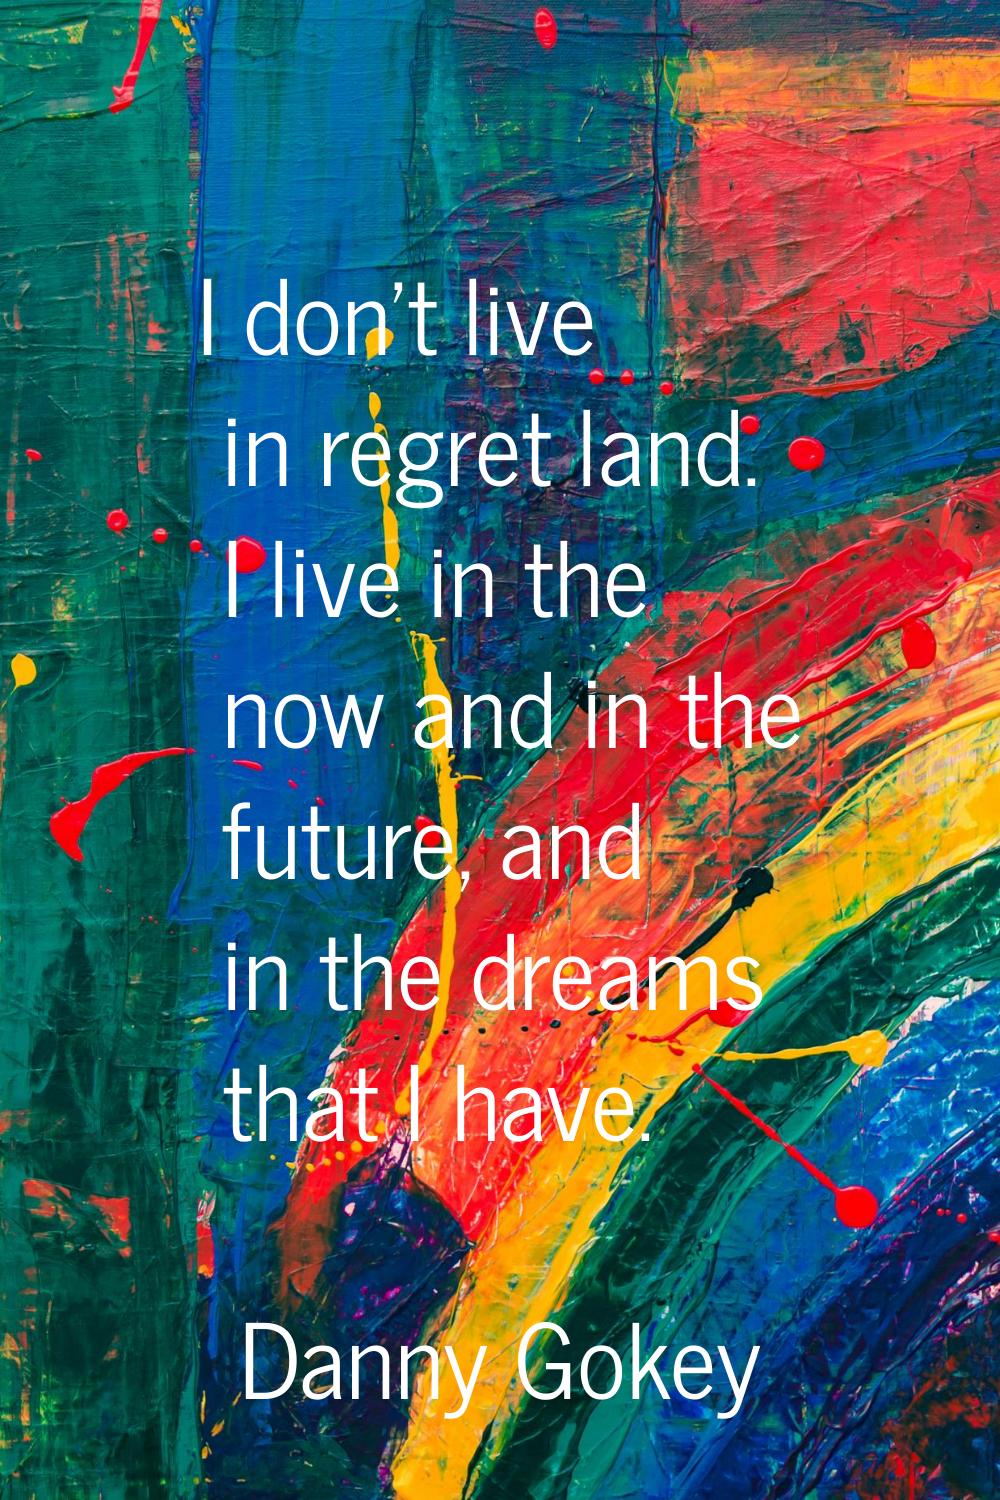 I don't live in regret land. I live in the now and in the future, and in the dreams that I have.